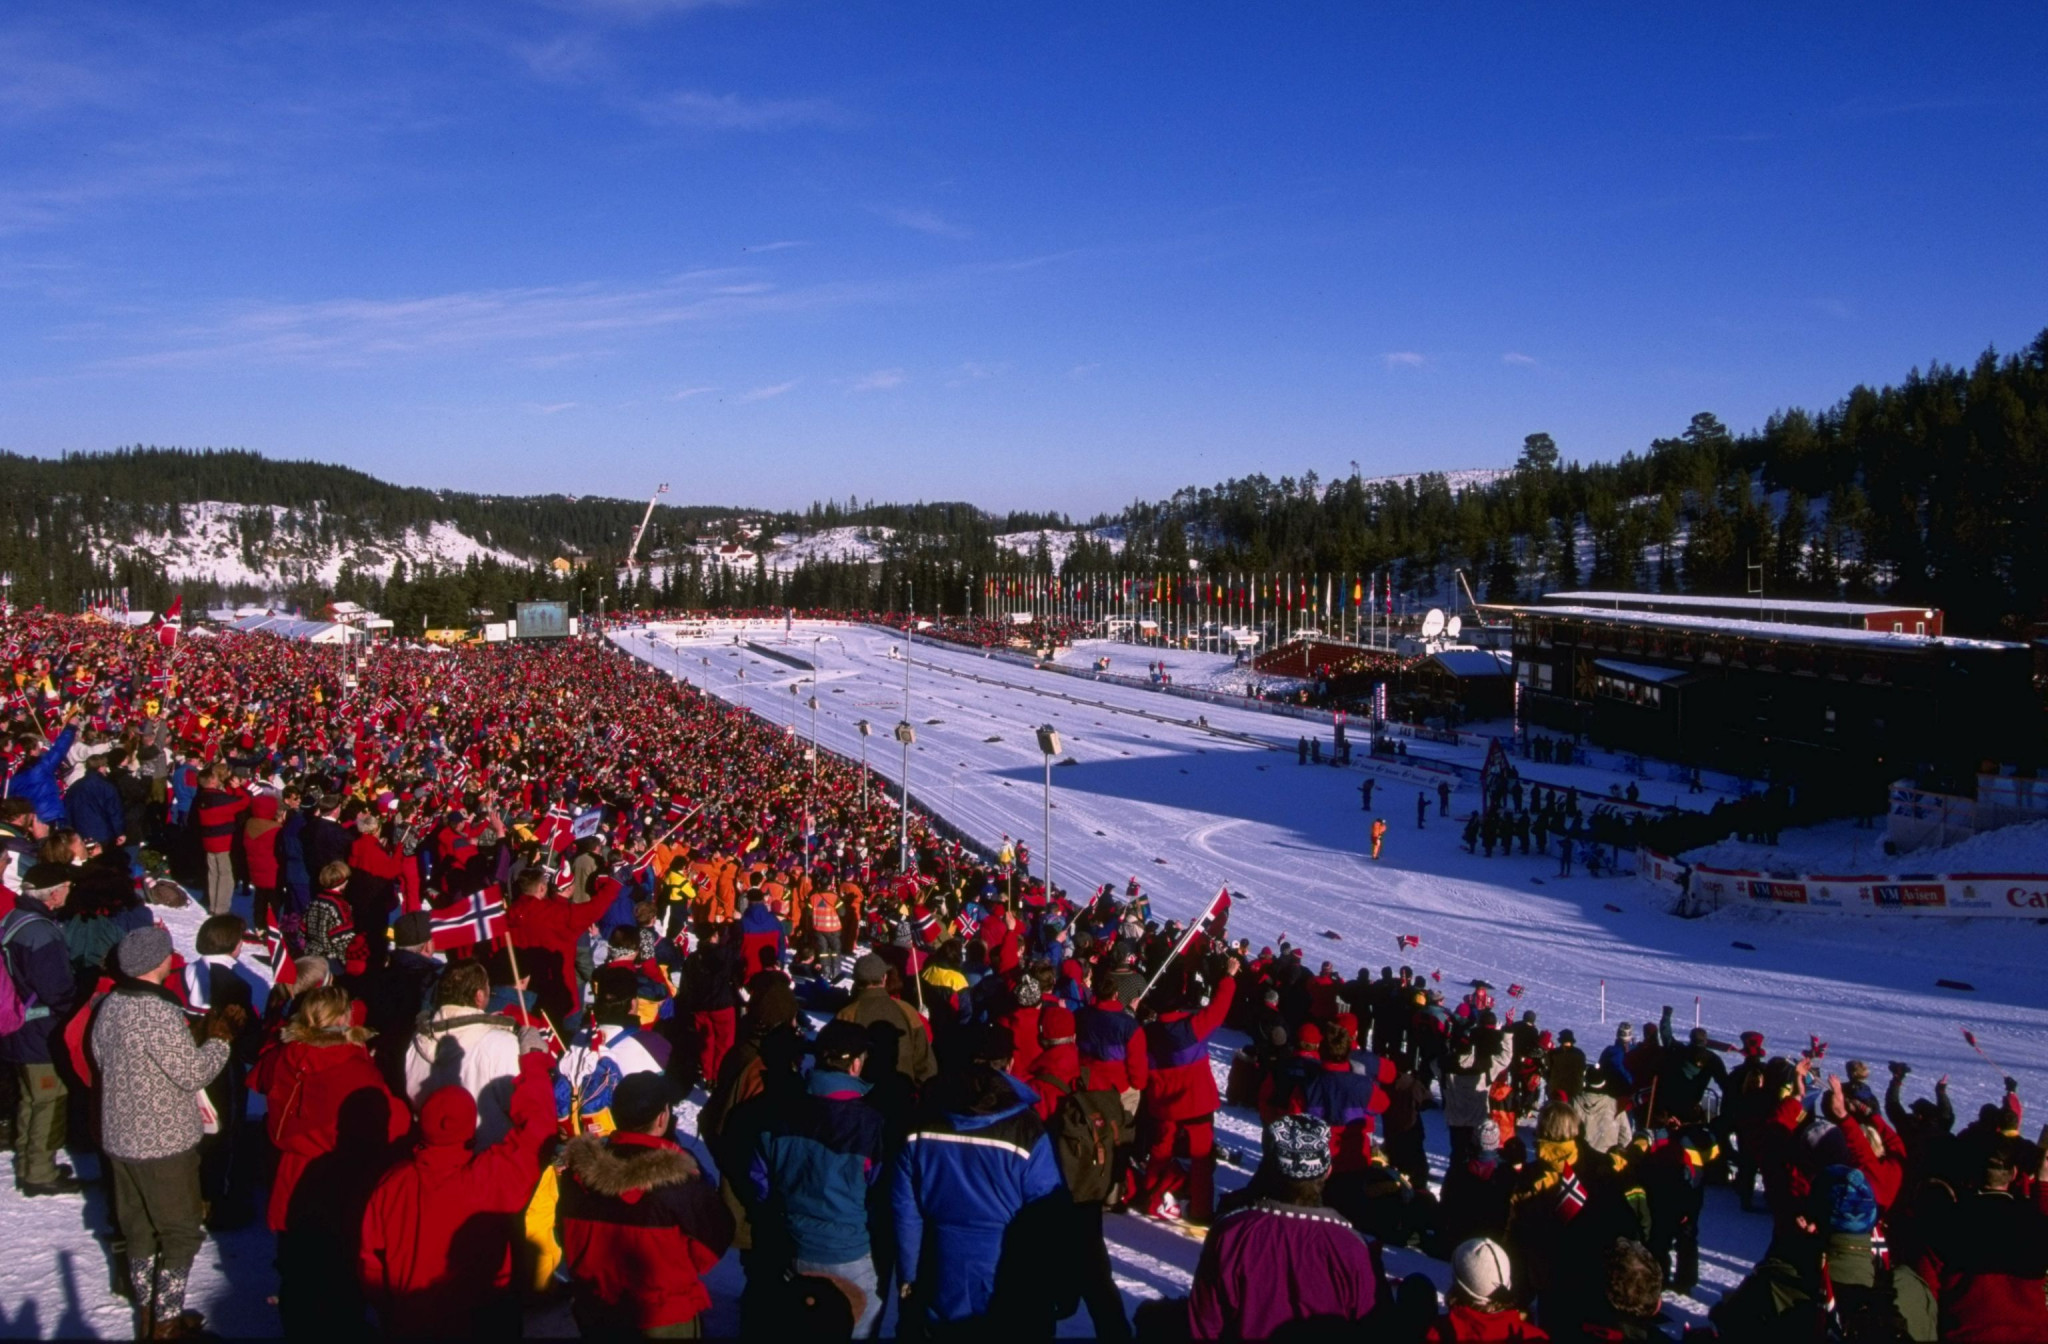 Trondheim's staging of the Nordic World Ski Championships in 1997 is alluded to in the logo for 2025 ©Getty Images